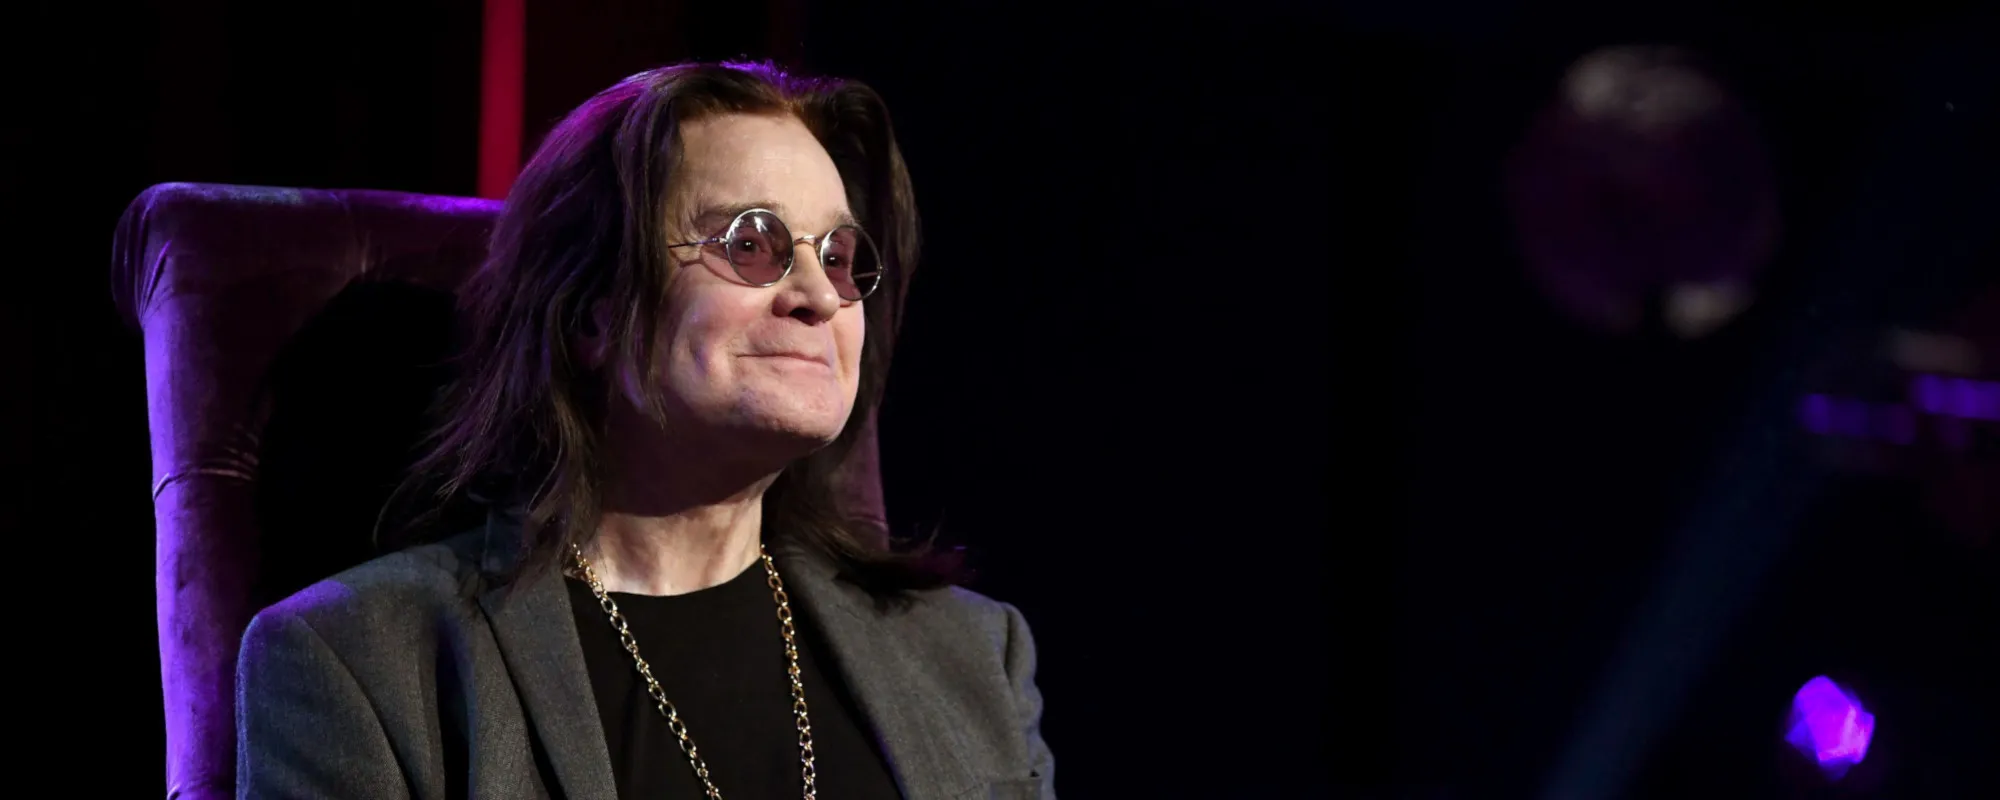 Ozzy Osbourne Tests Positive for COVID-19, Wife Sharon Says She’s “Very Worried”